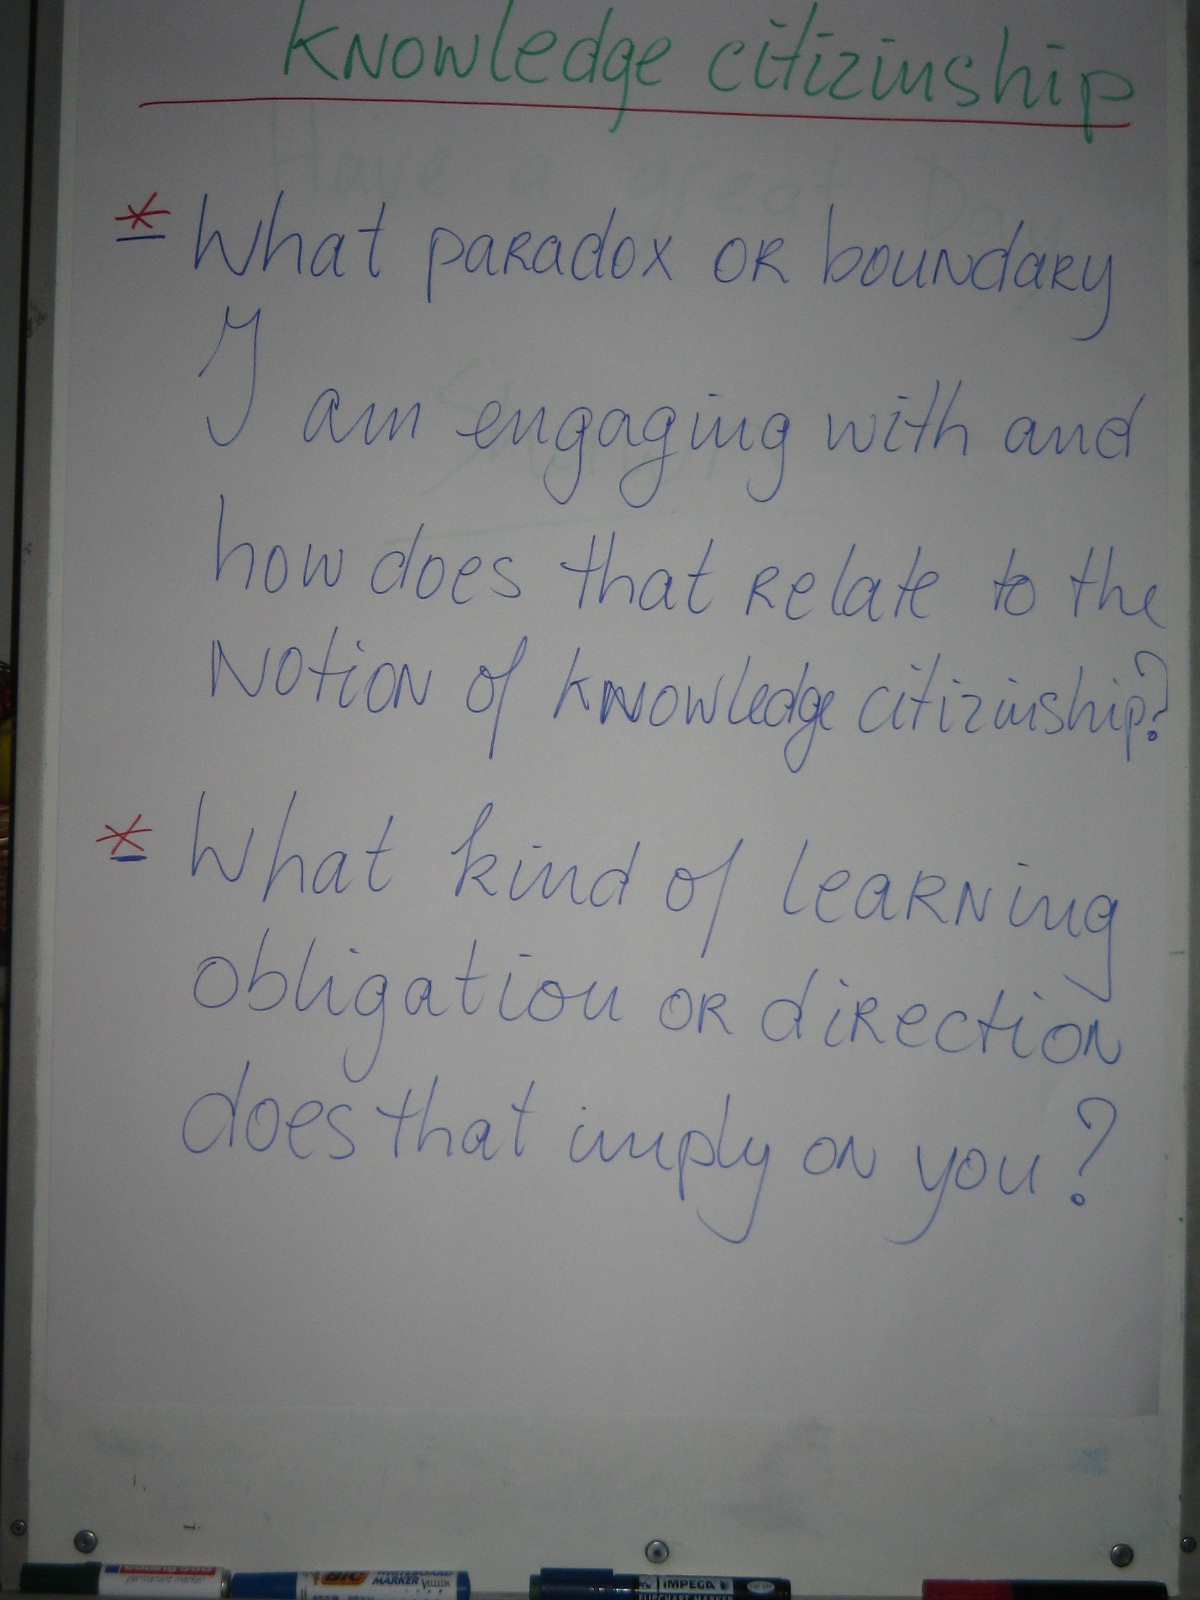 a handwritten note is shown on a large white board